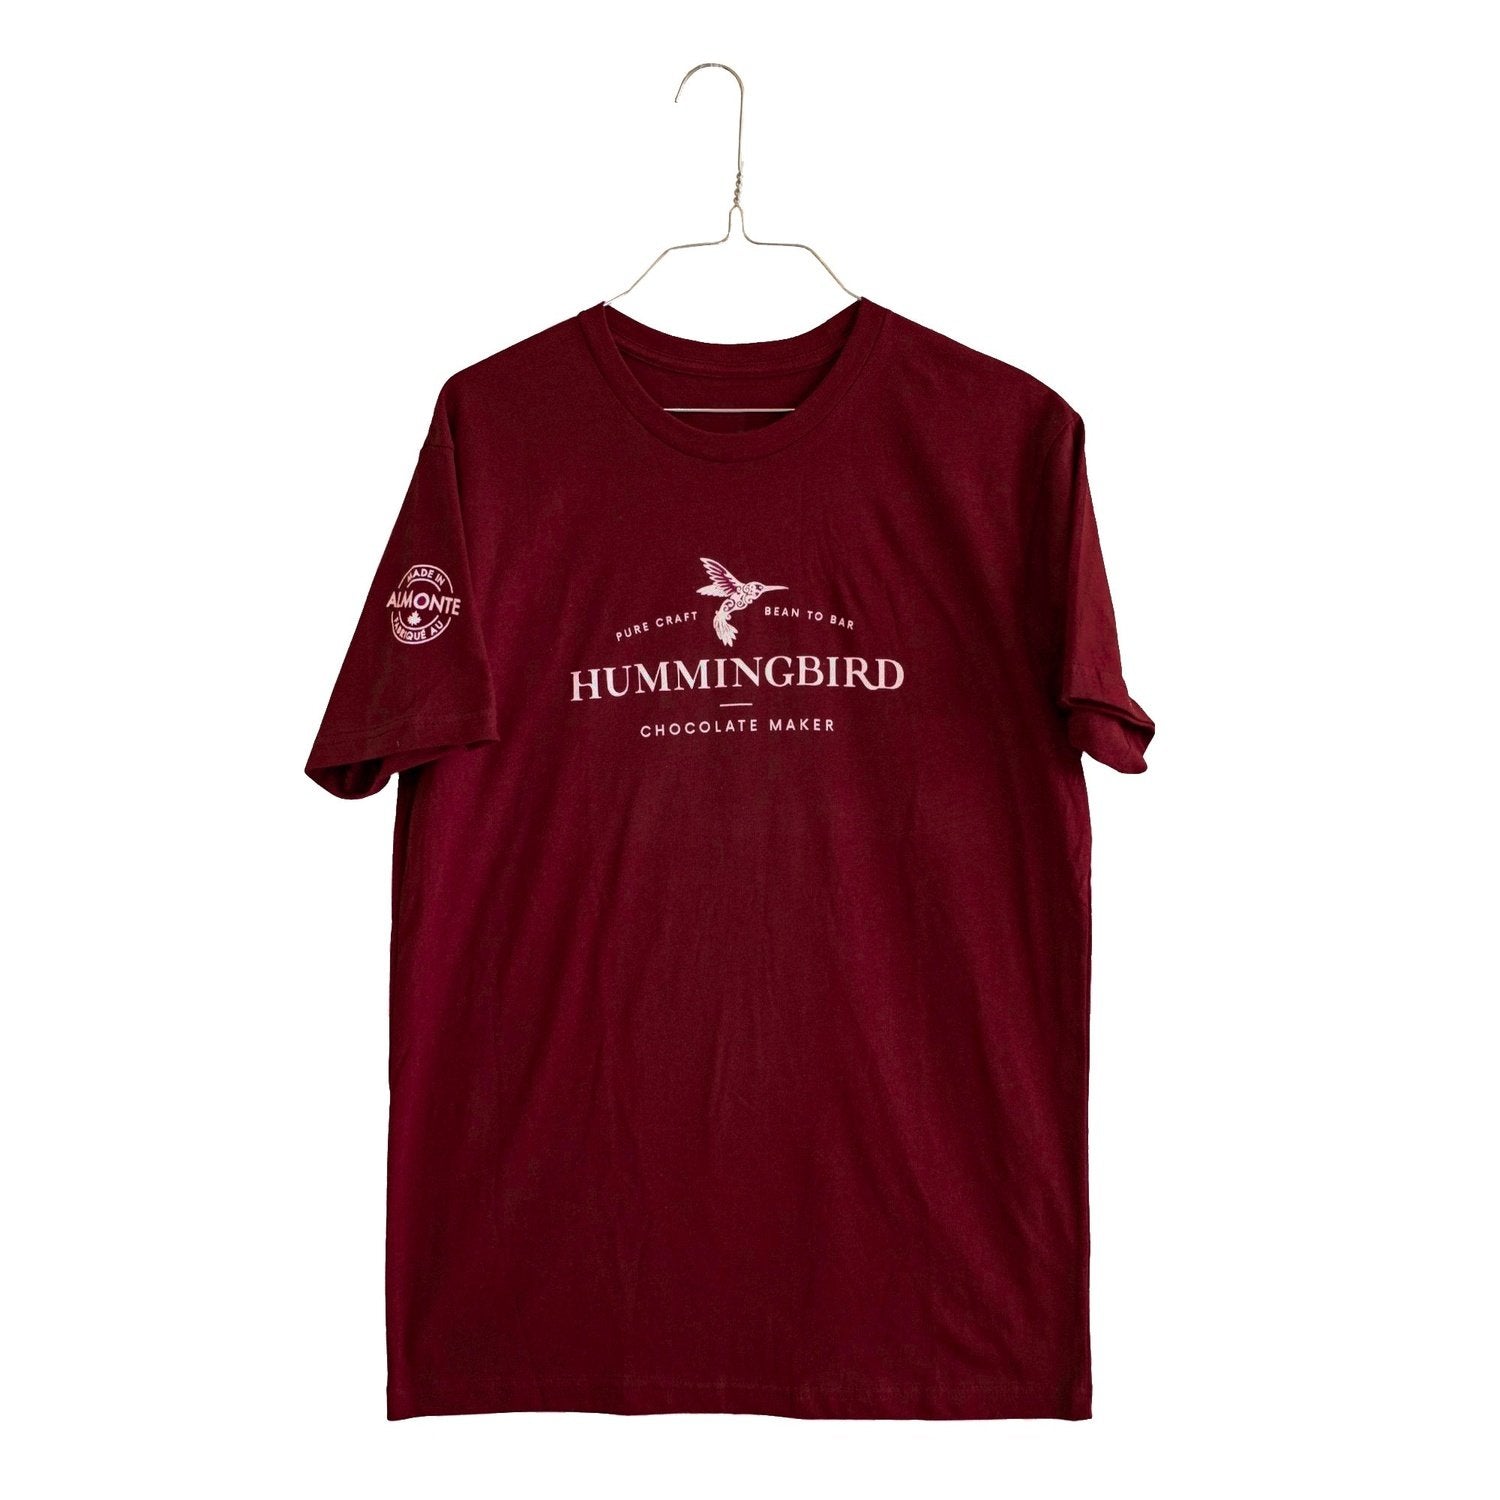 Maroon unisex t-shirt printed with Hummingbird Chocolate Maker logo on front chest and Made in Almonte logo on the right arm